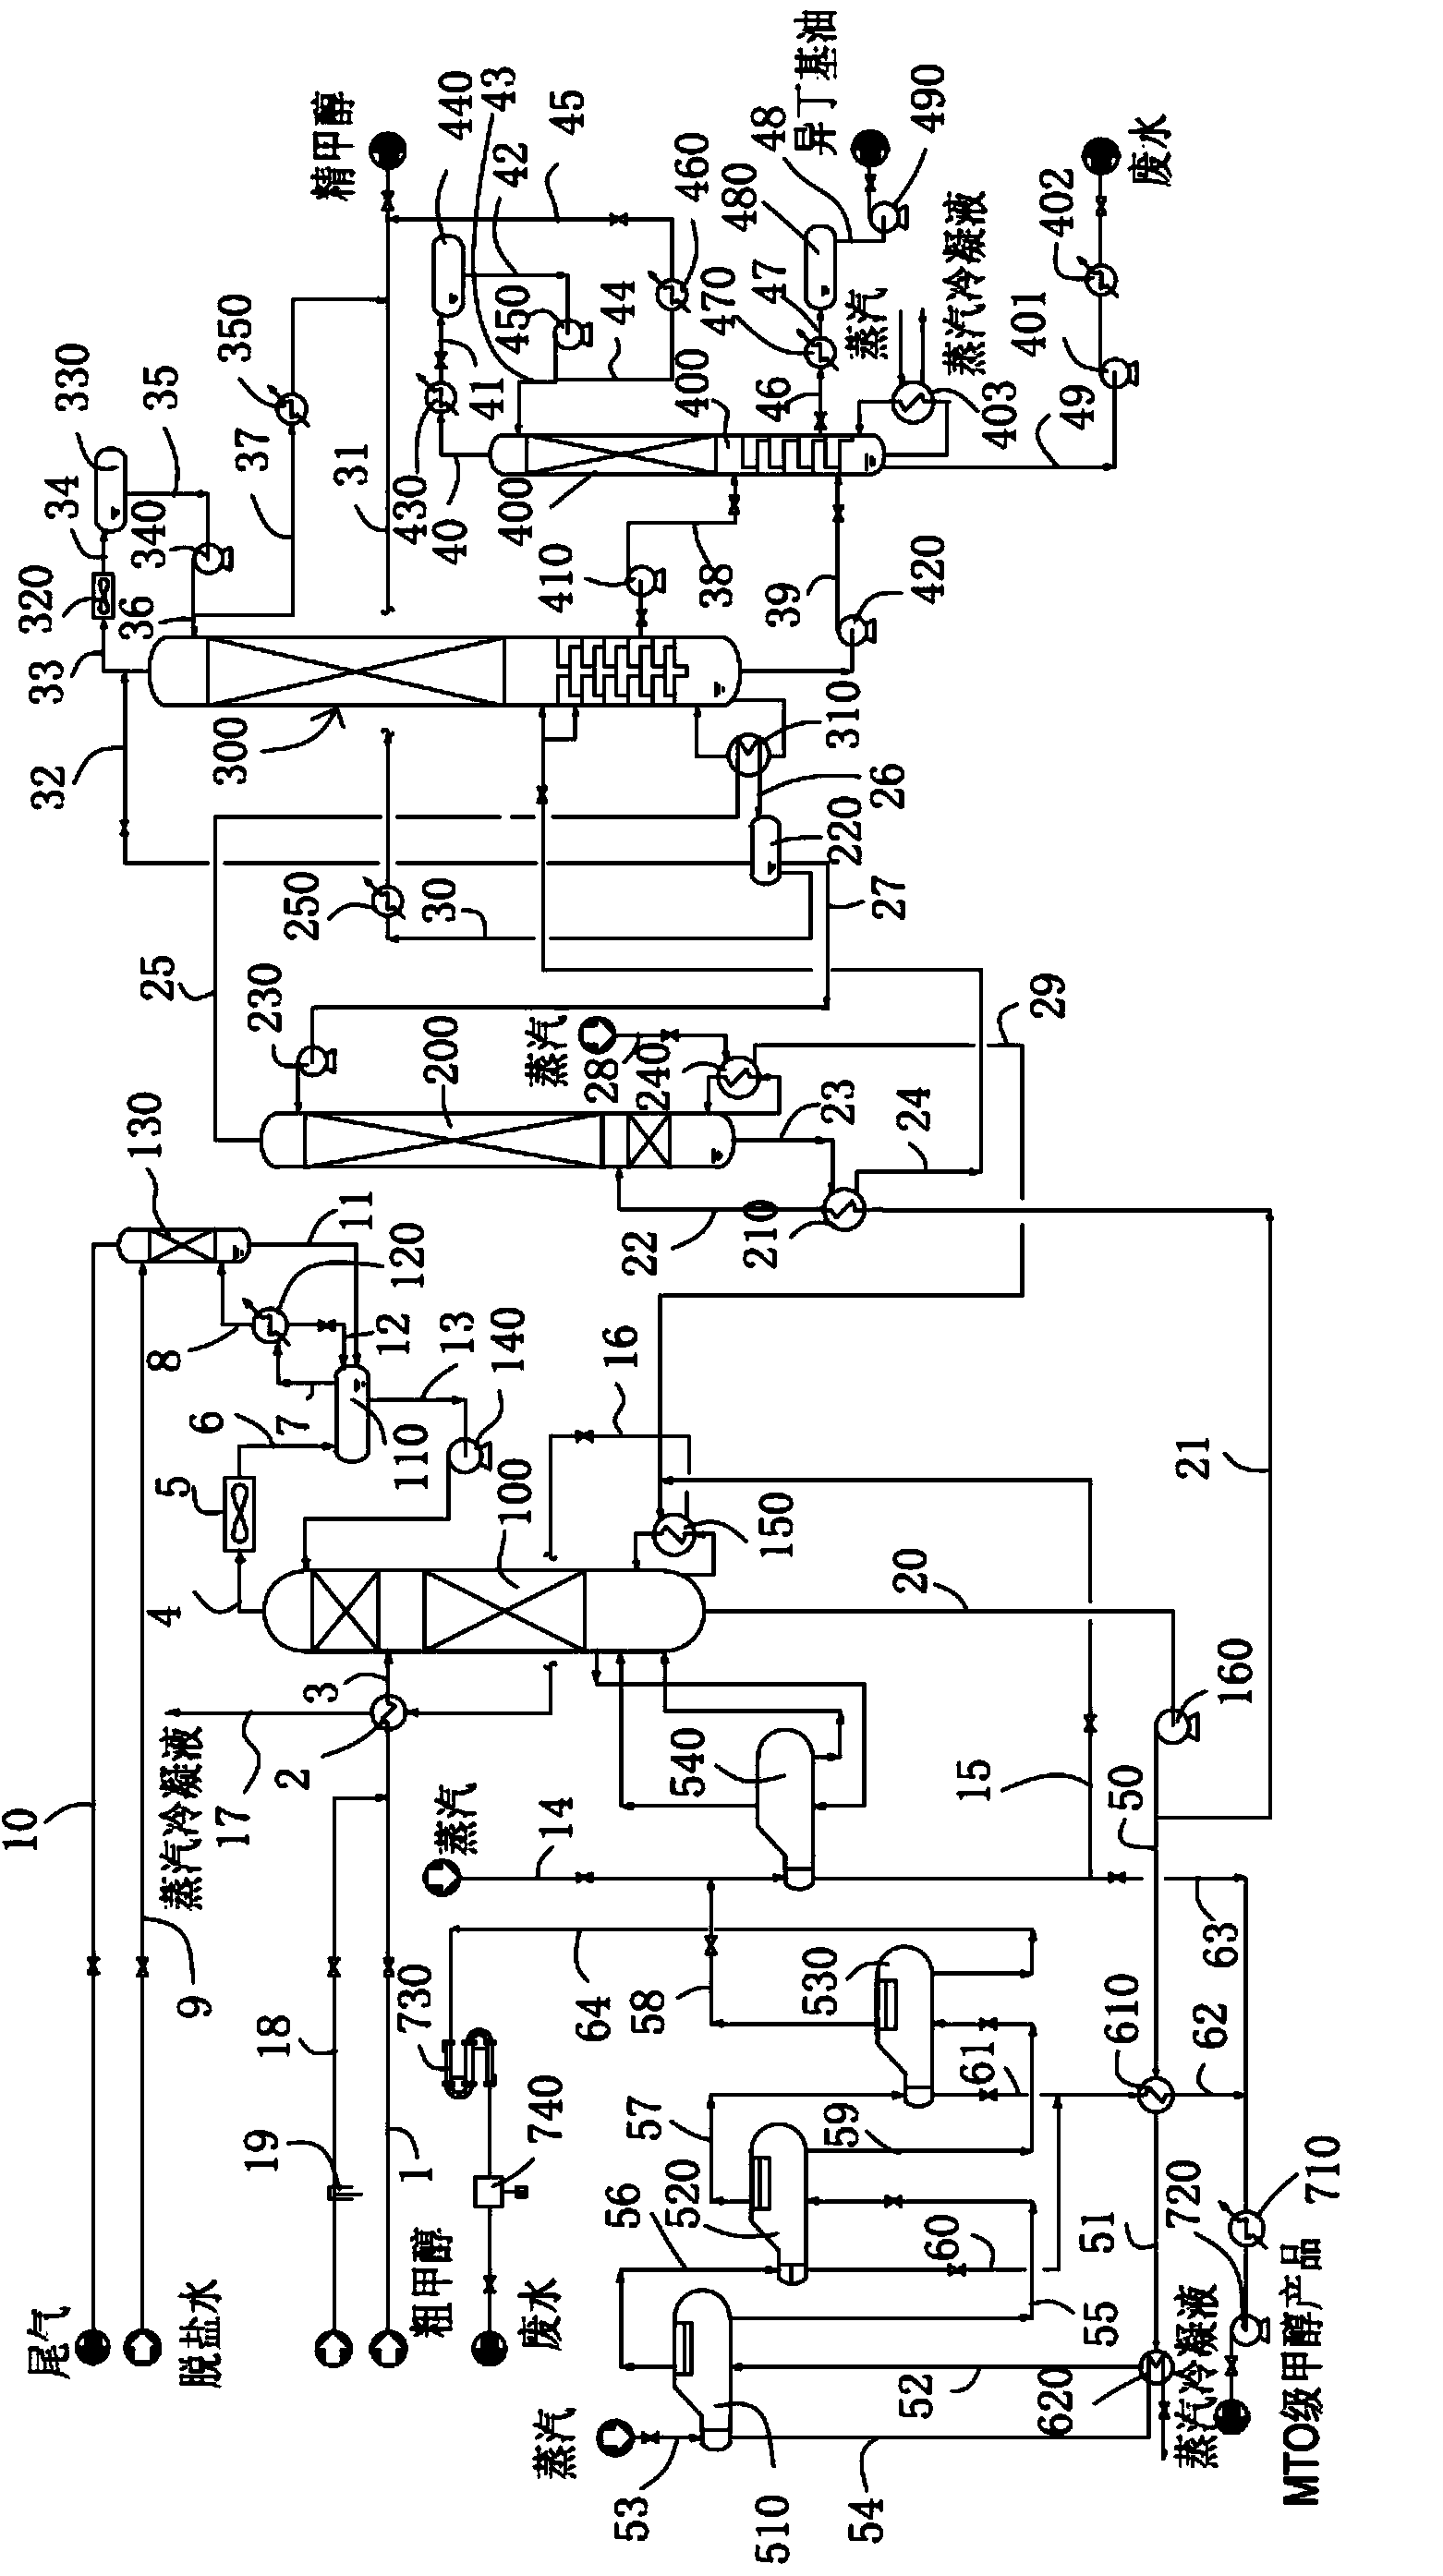 Flexible methanol rectification method and device capable of producing both MTO-grade and AA-grade methanol